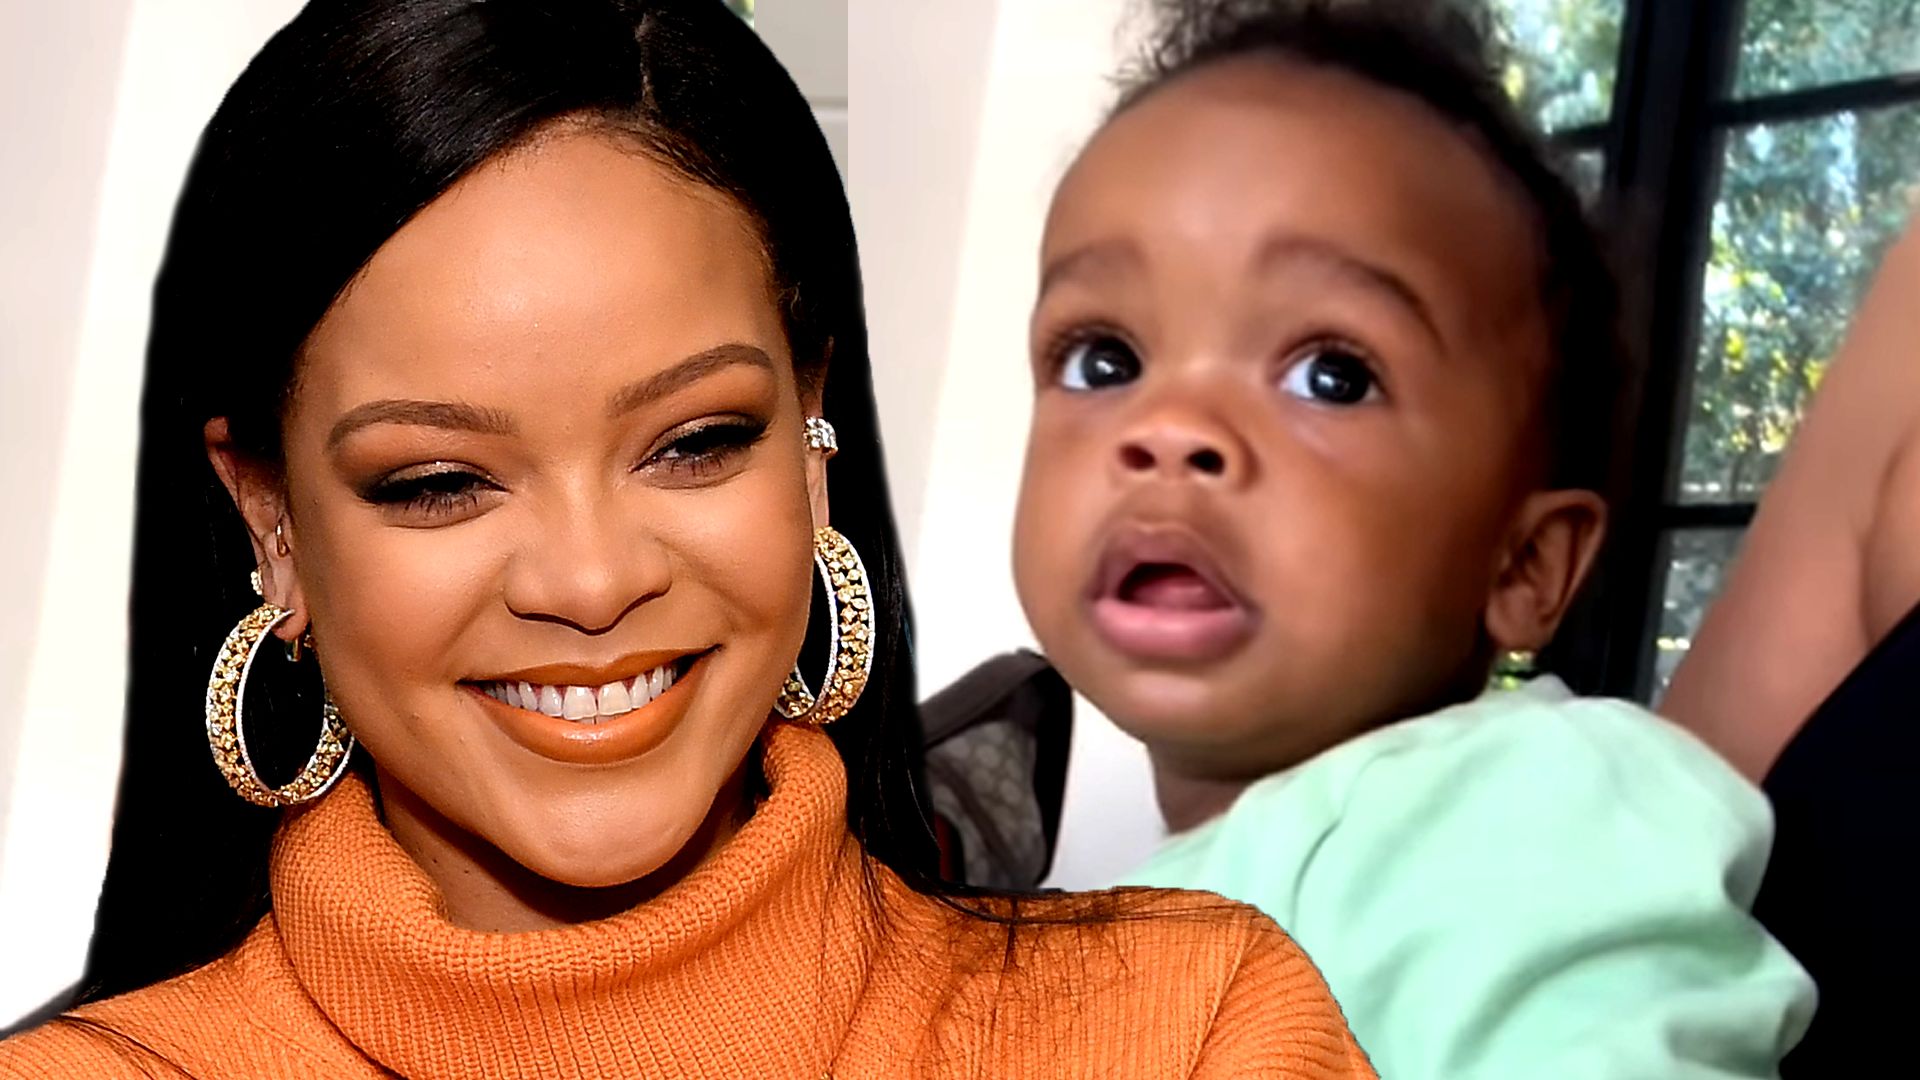 The Cutest Babies In Hip Hop – Guess Who!